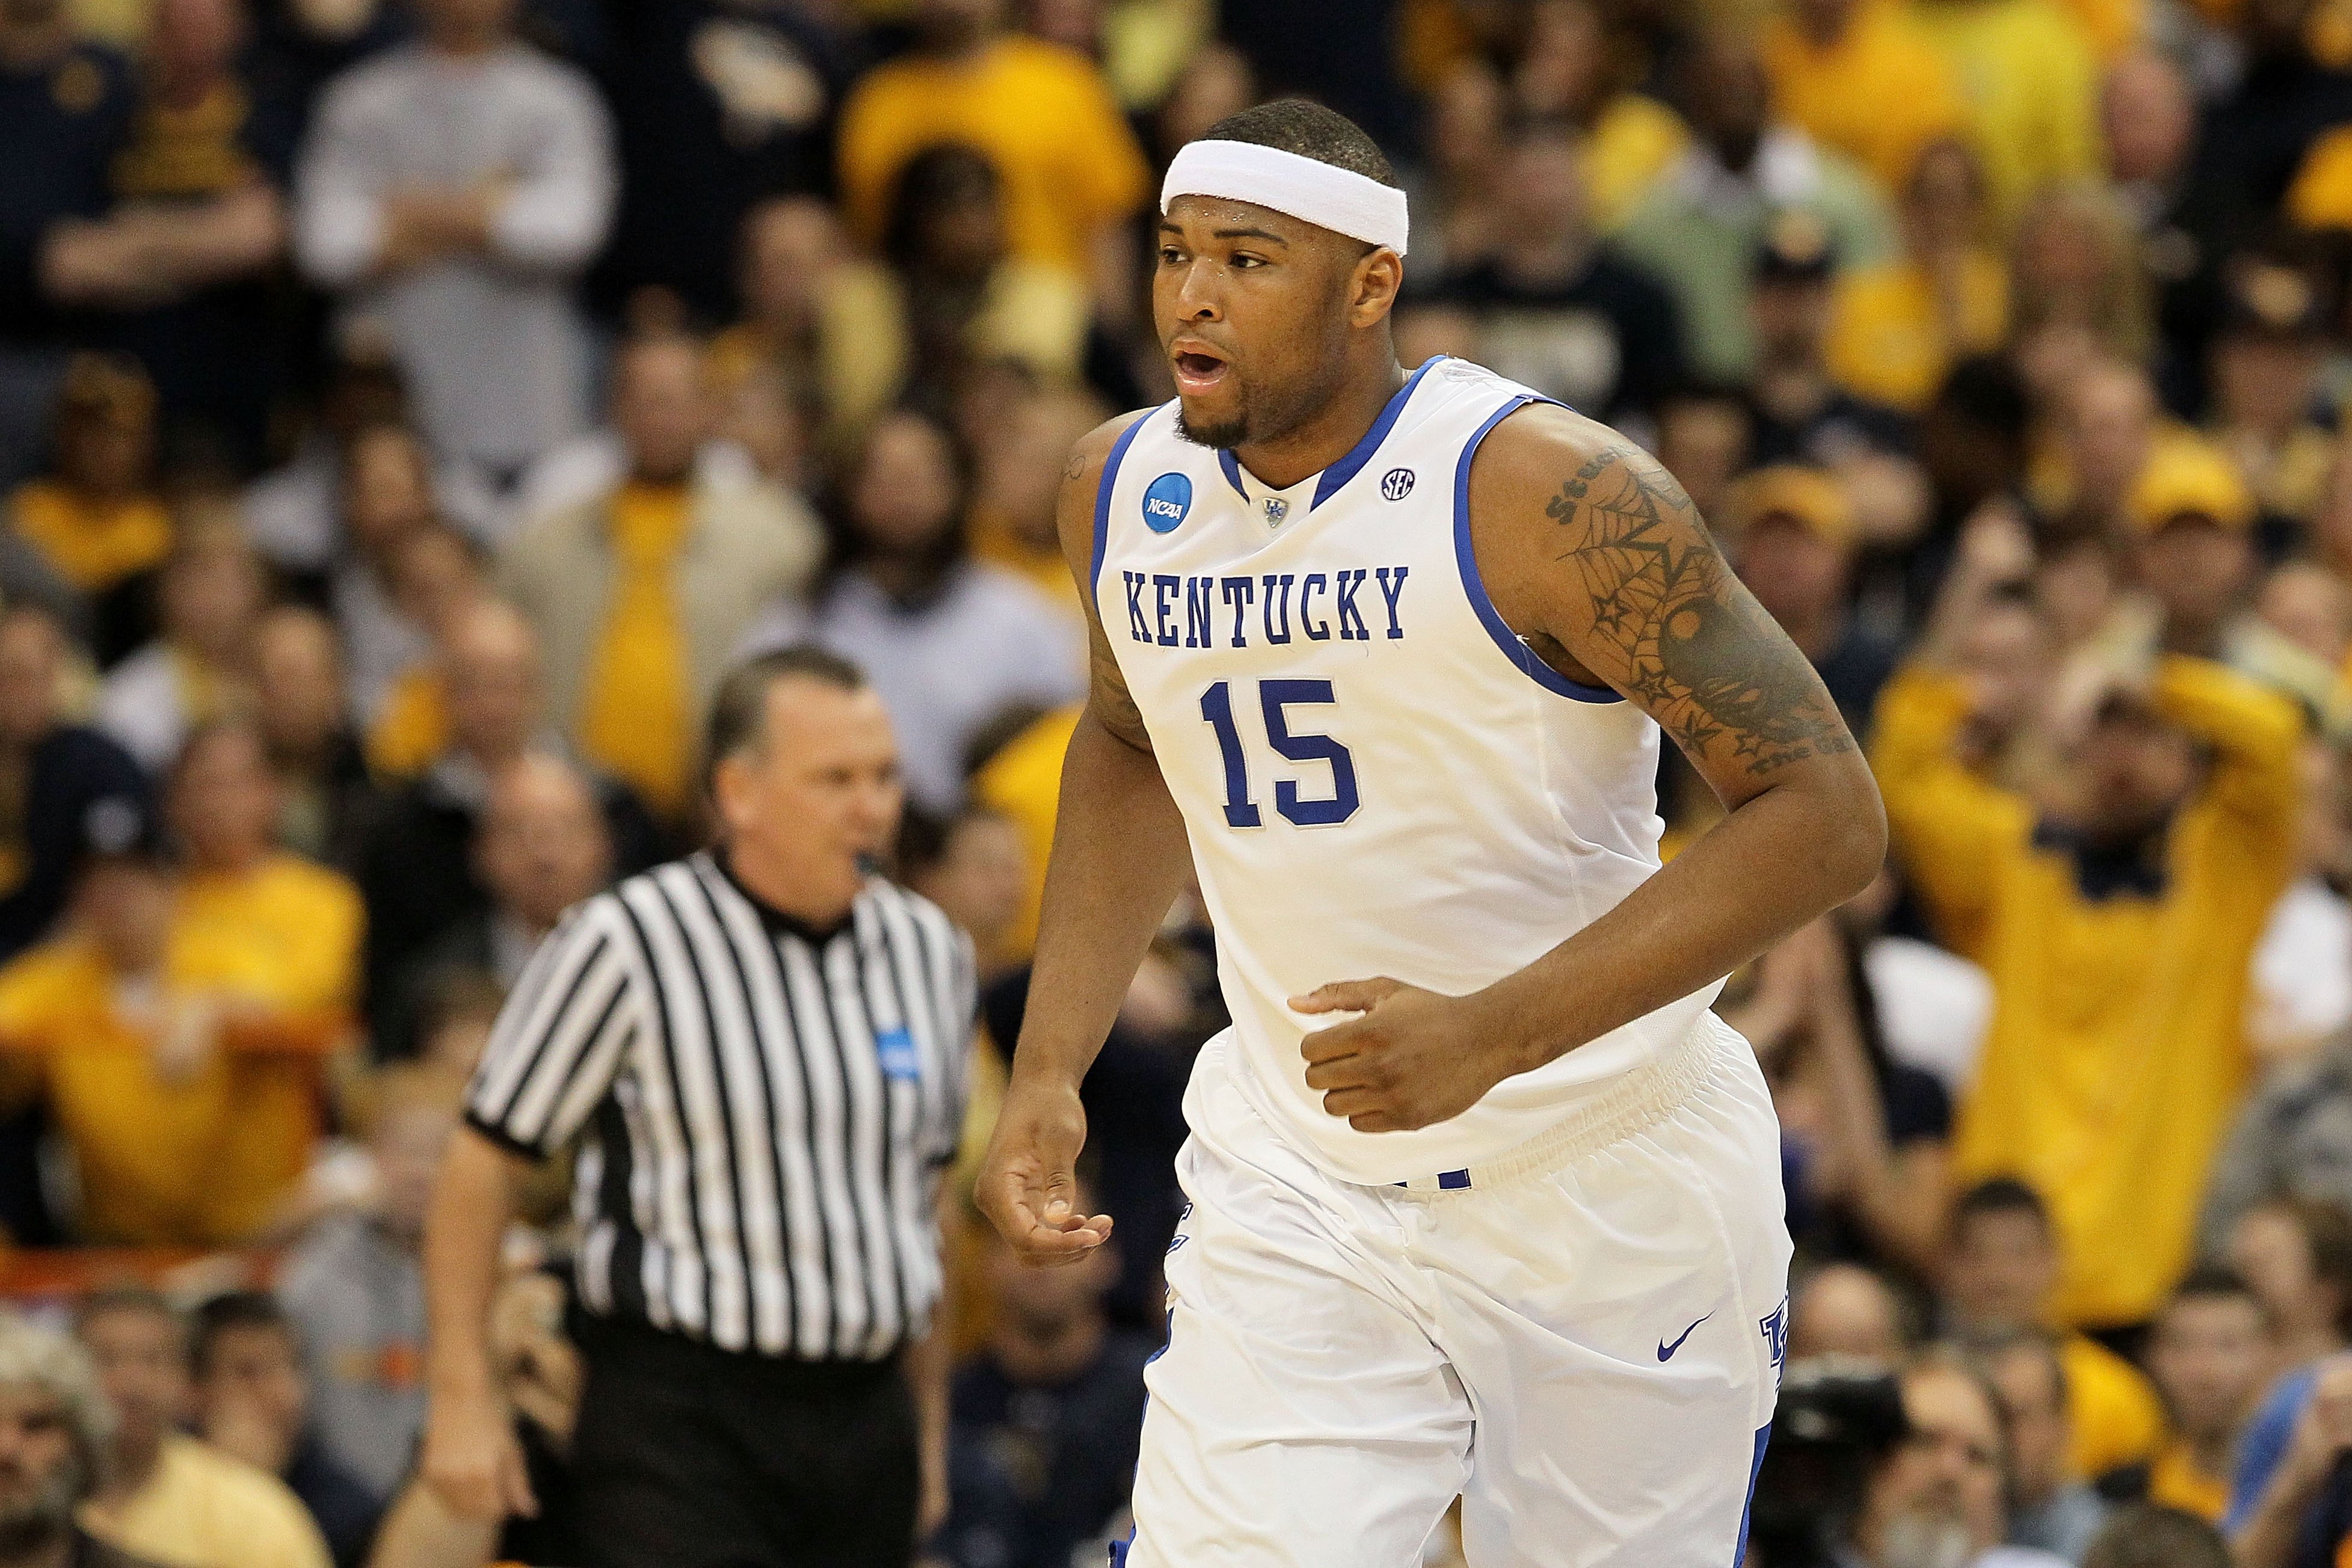 SYRACUSE, NY - MARCH 27:  DeMarcus Cousins #15 of the Kentucky Wildcats runs up court against the West Virginia Mountaineers during the east regional final of the 2010 NCAA men's basketball tournament at the Carrier Dome on March 27, 2010 in Syracuse, New